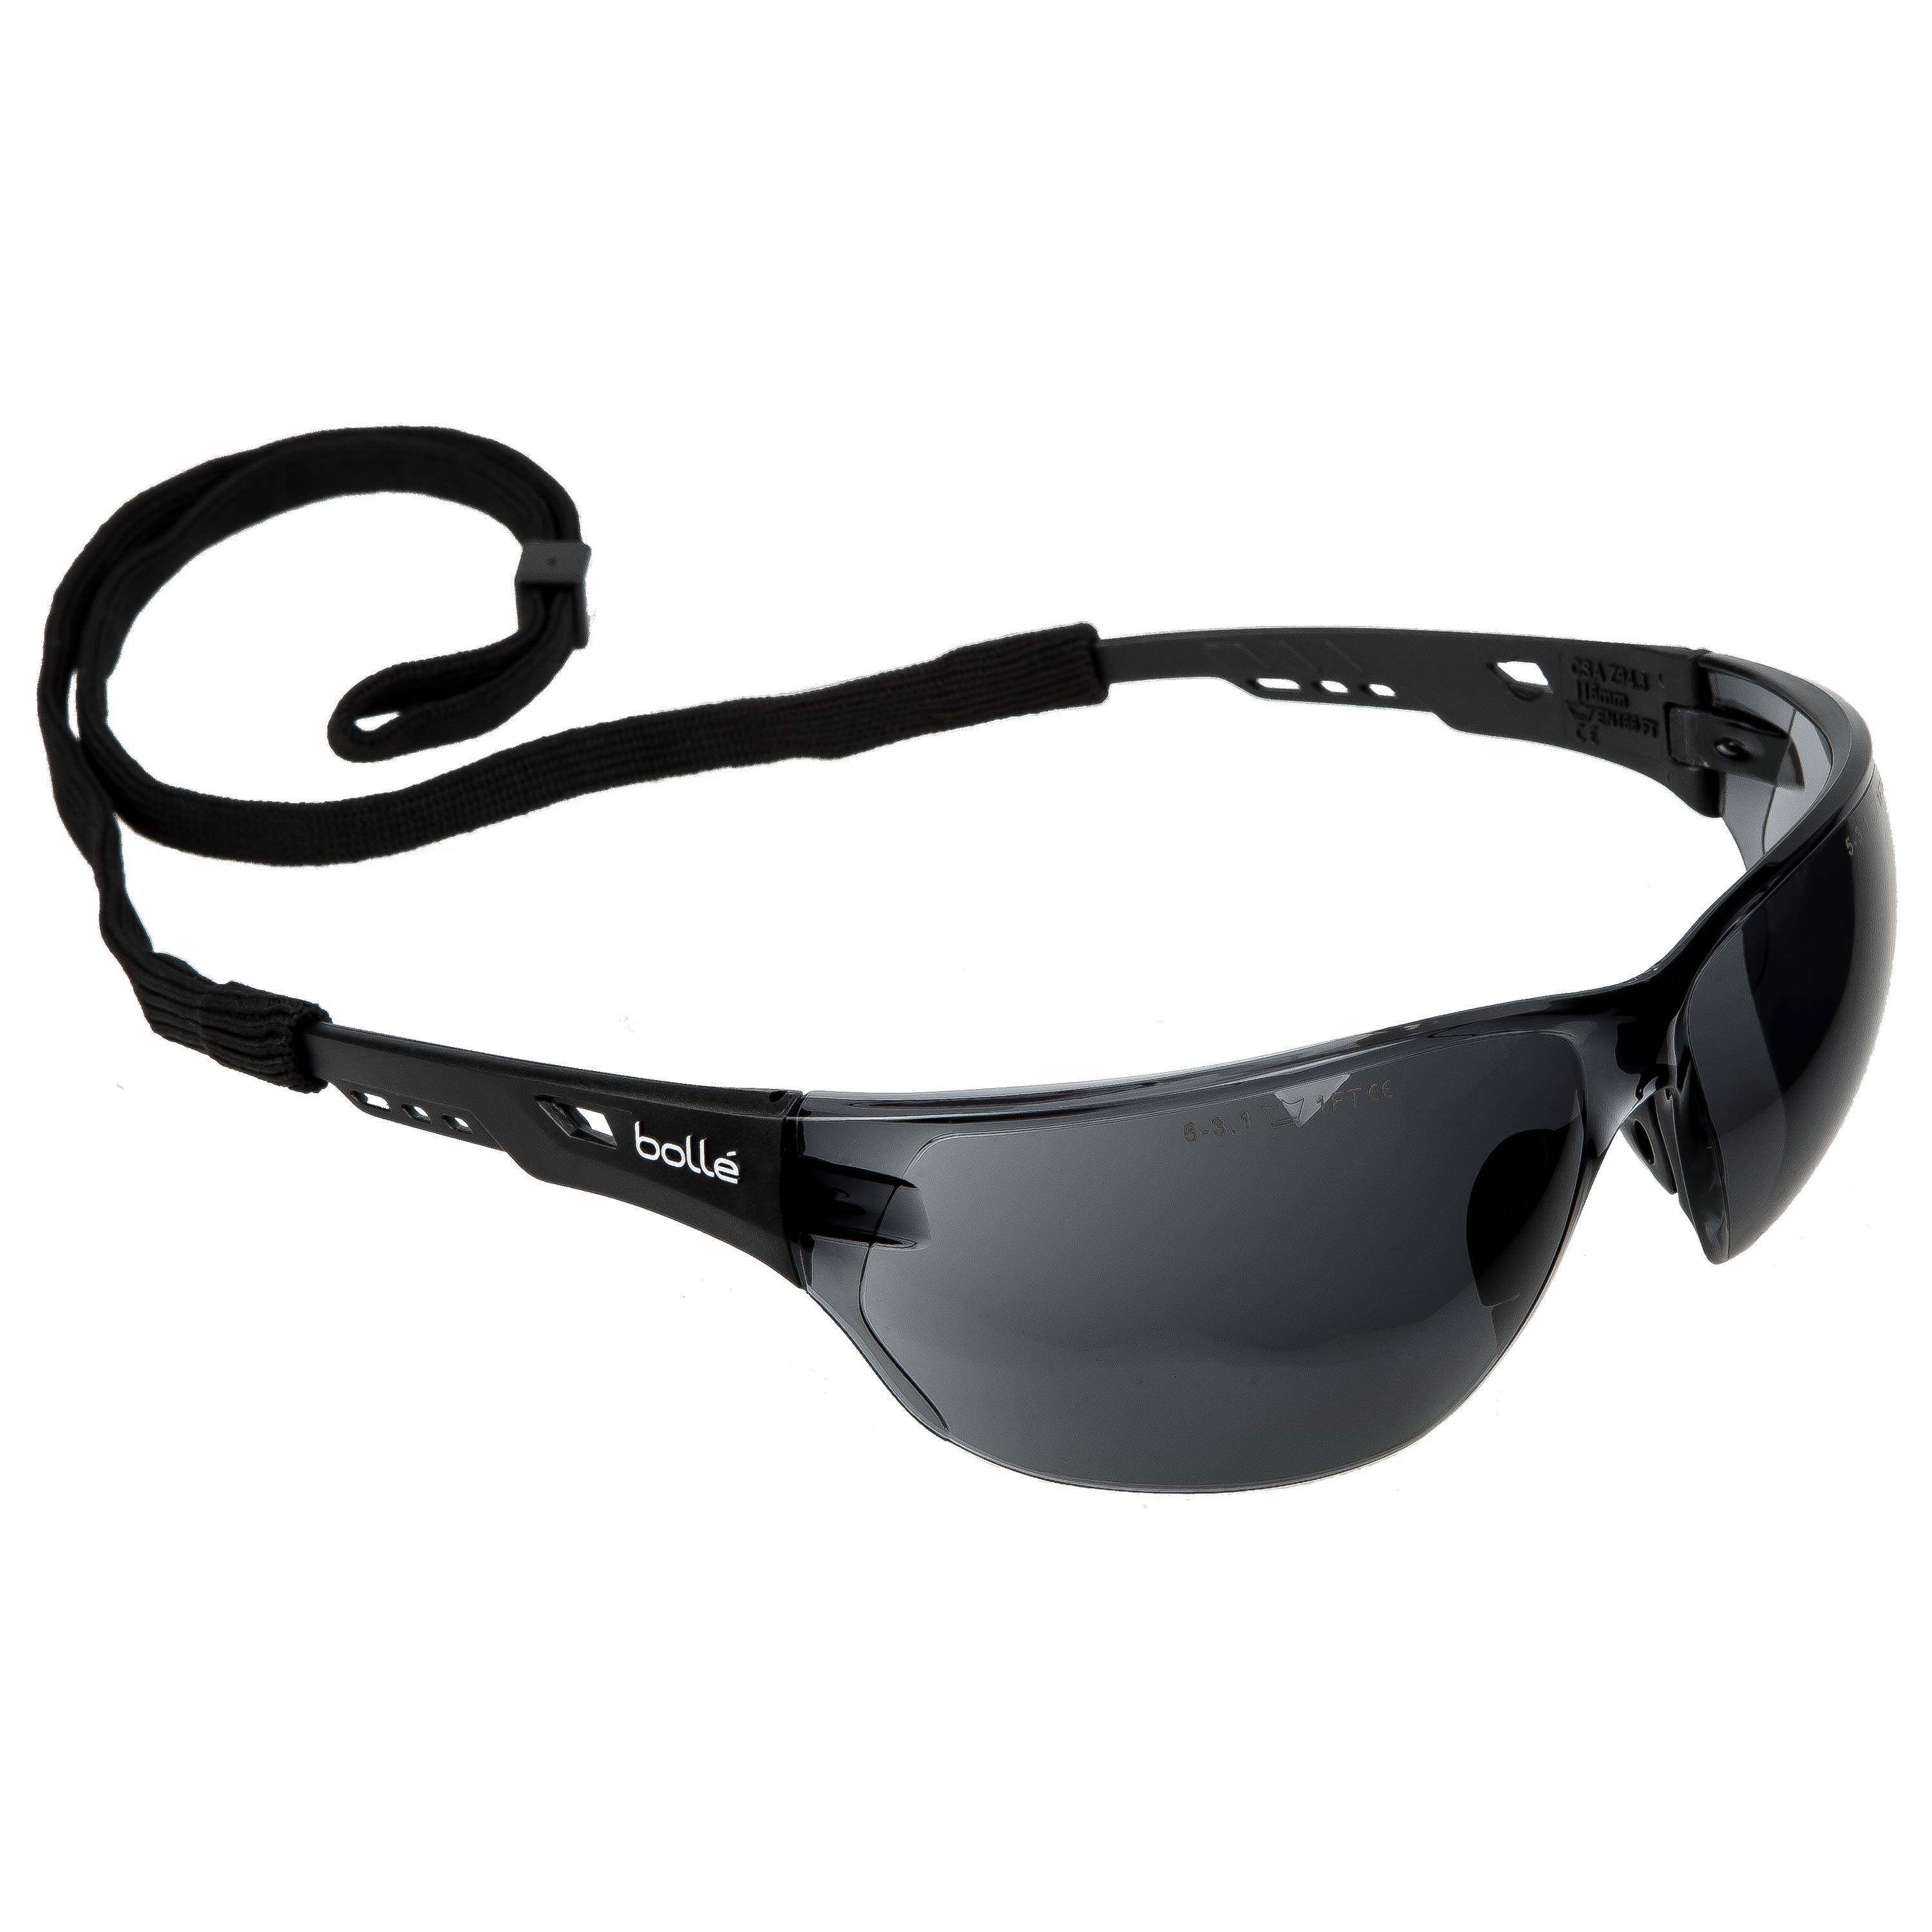 Bolle Ness Safety Glasses Bolle Spectacles Anti-scratch Anti-fog Lens NESSPSI x2 